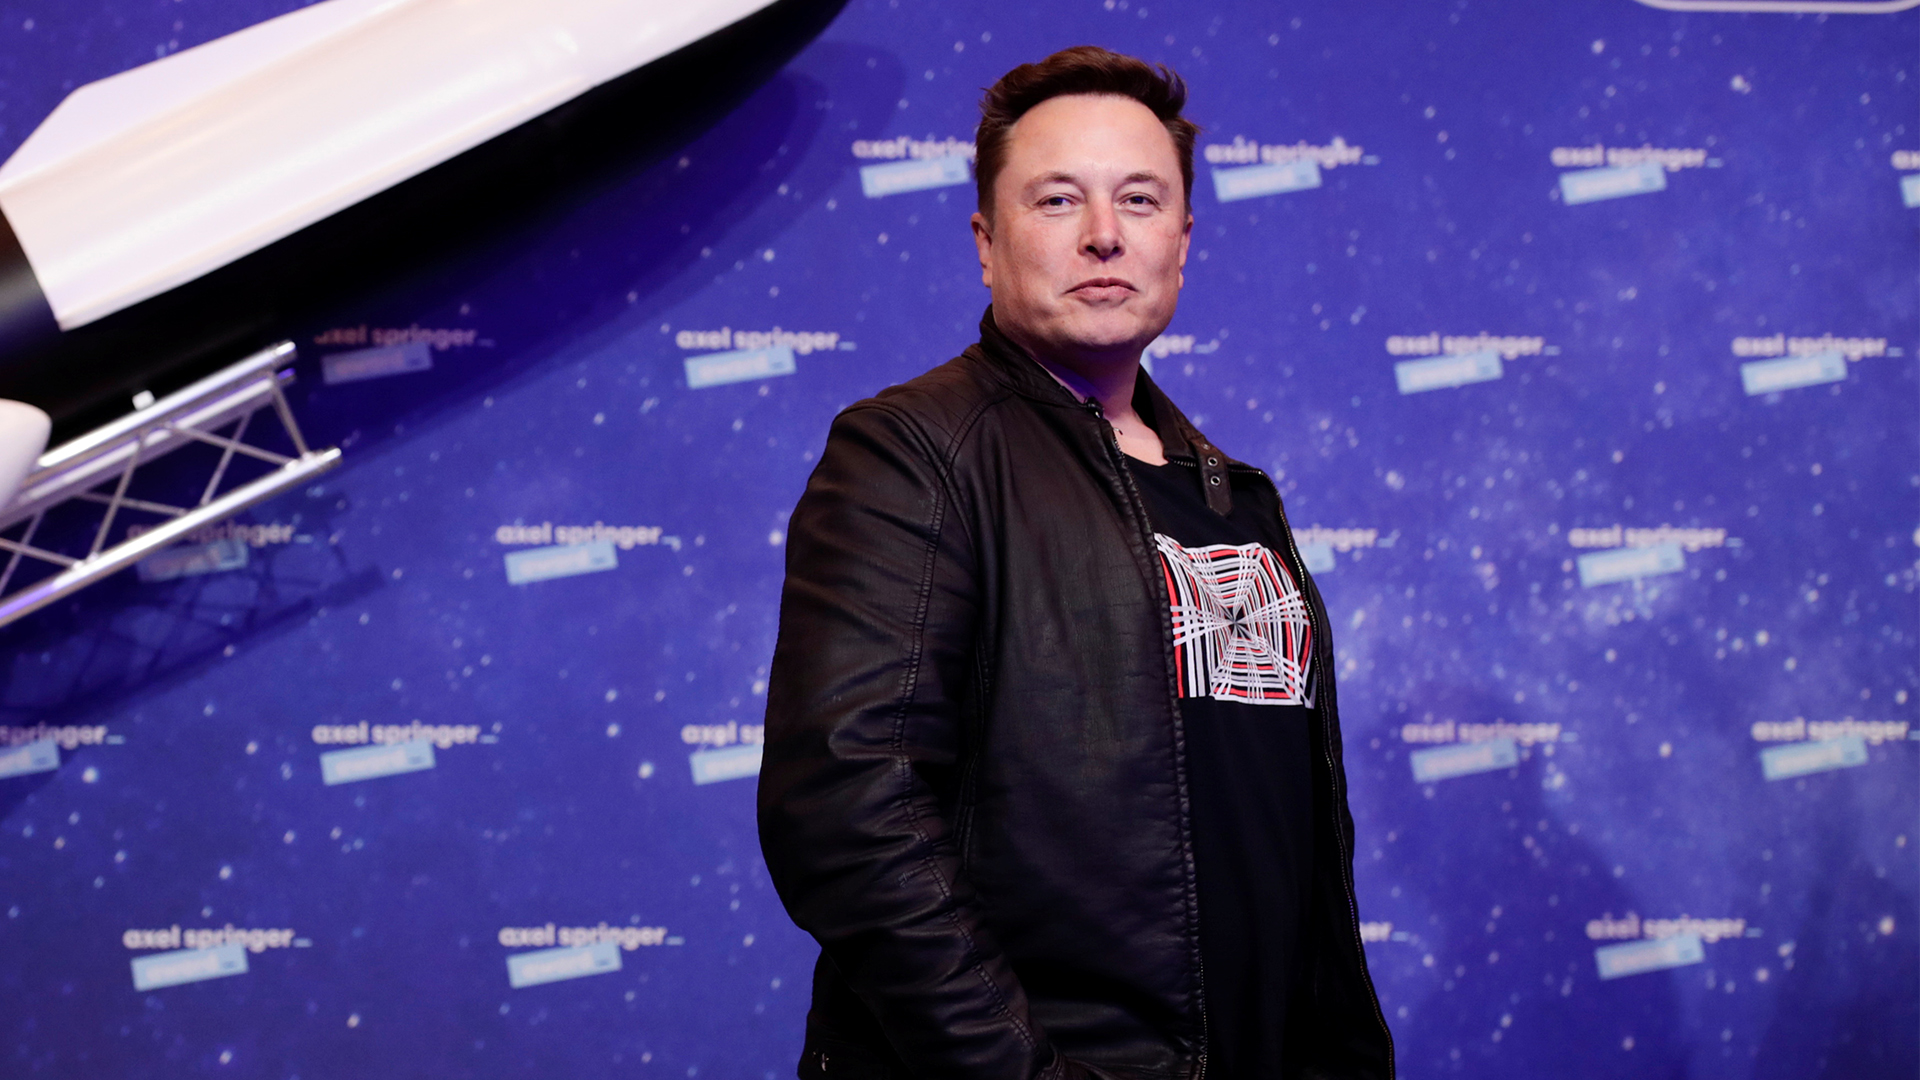 Here's Why Elon Musk Says His Estimated $44B Twitter Deal Is 'Temporary On Hold'